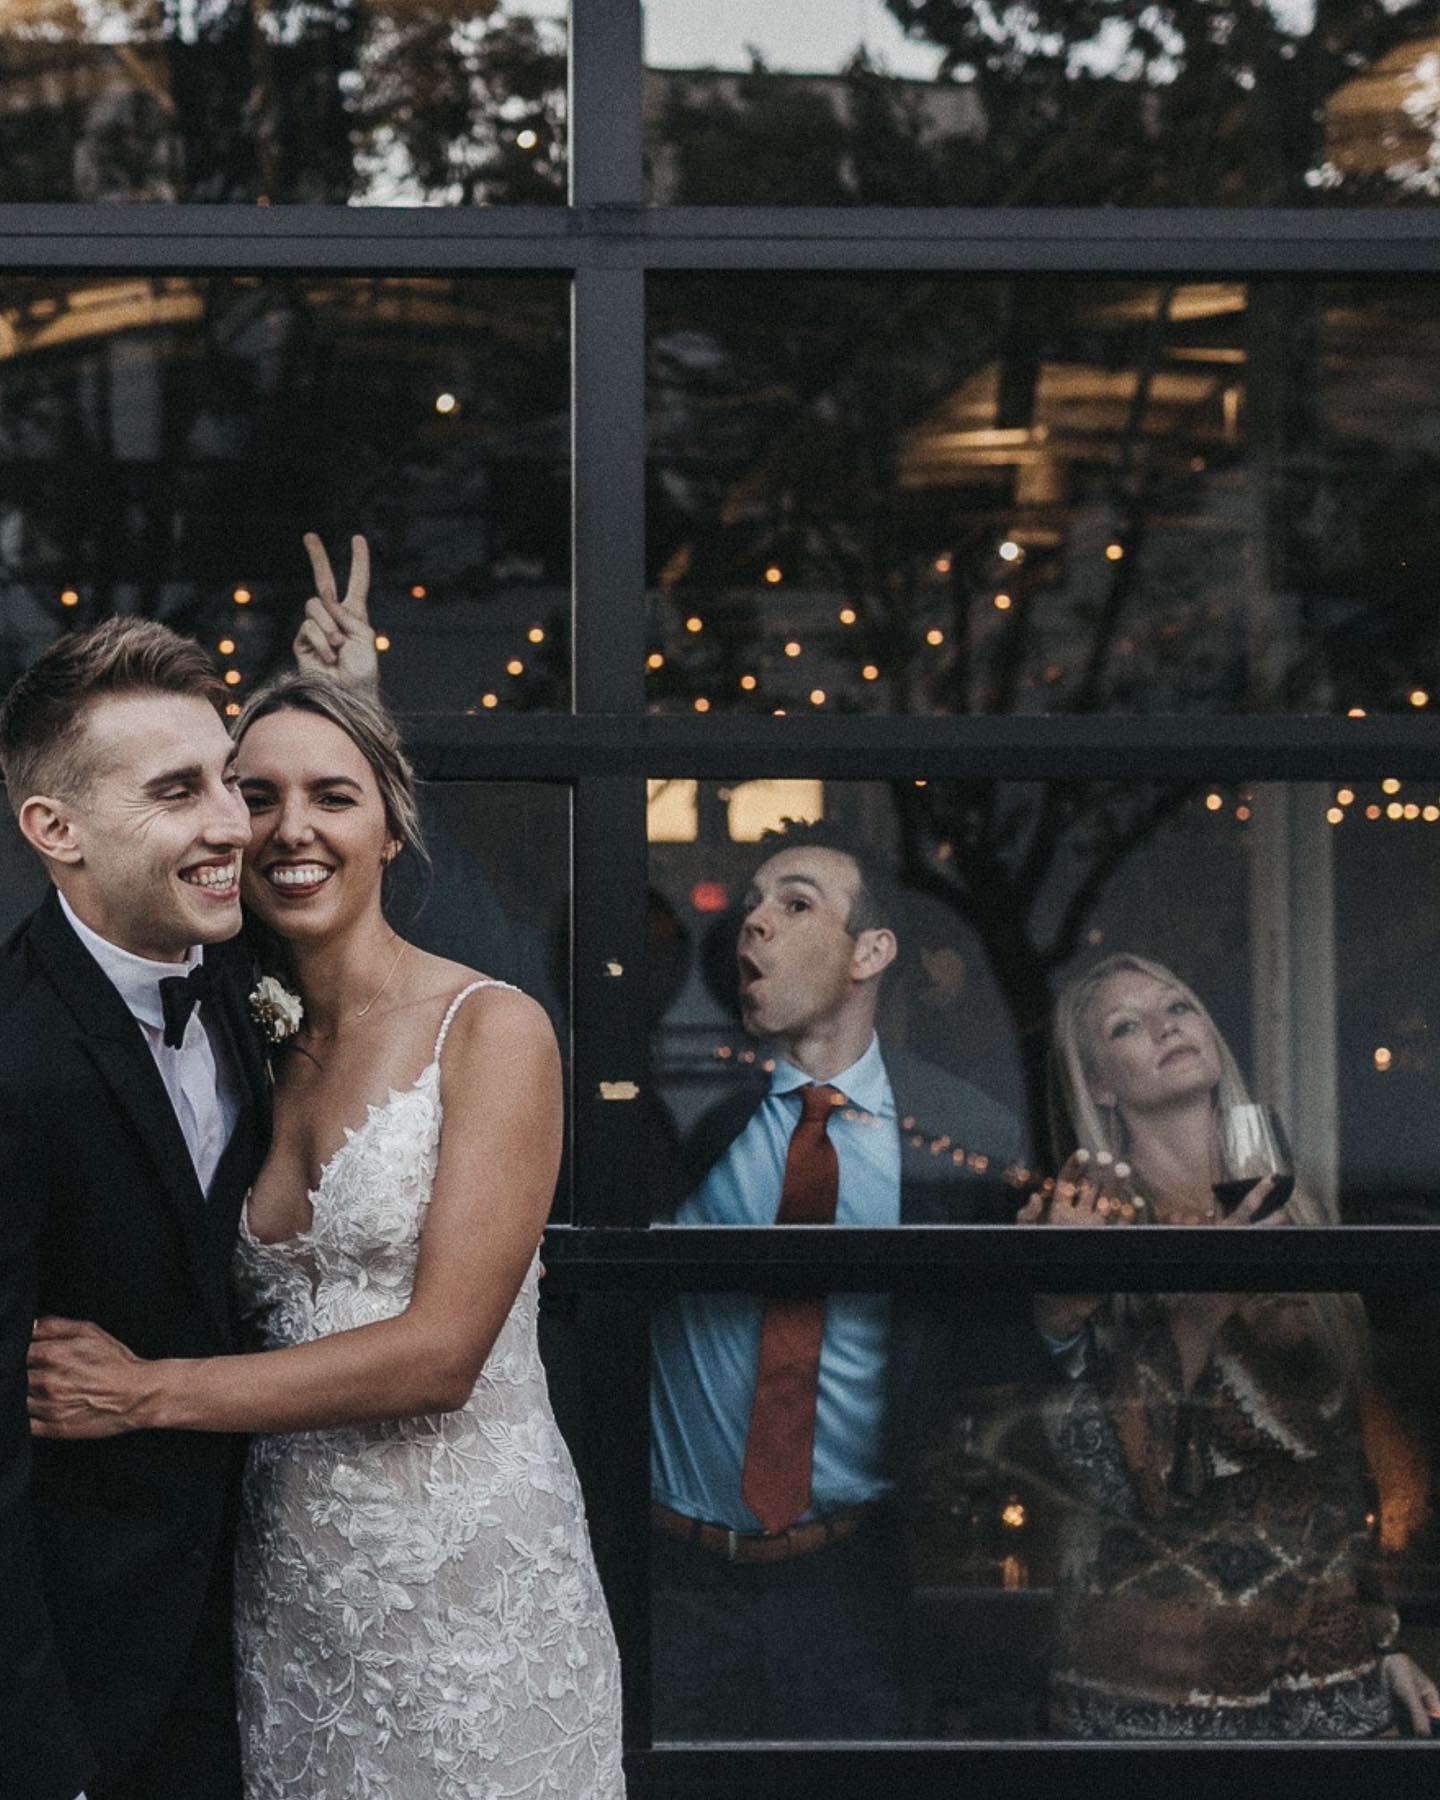 a married couple is posing while their friends making funny gestures from the other side of a glass pane